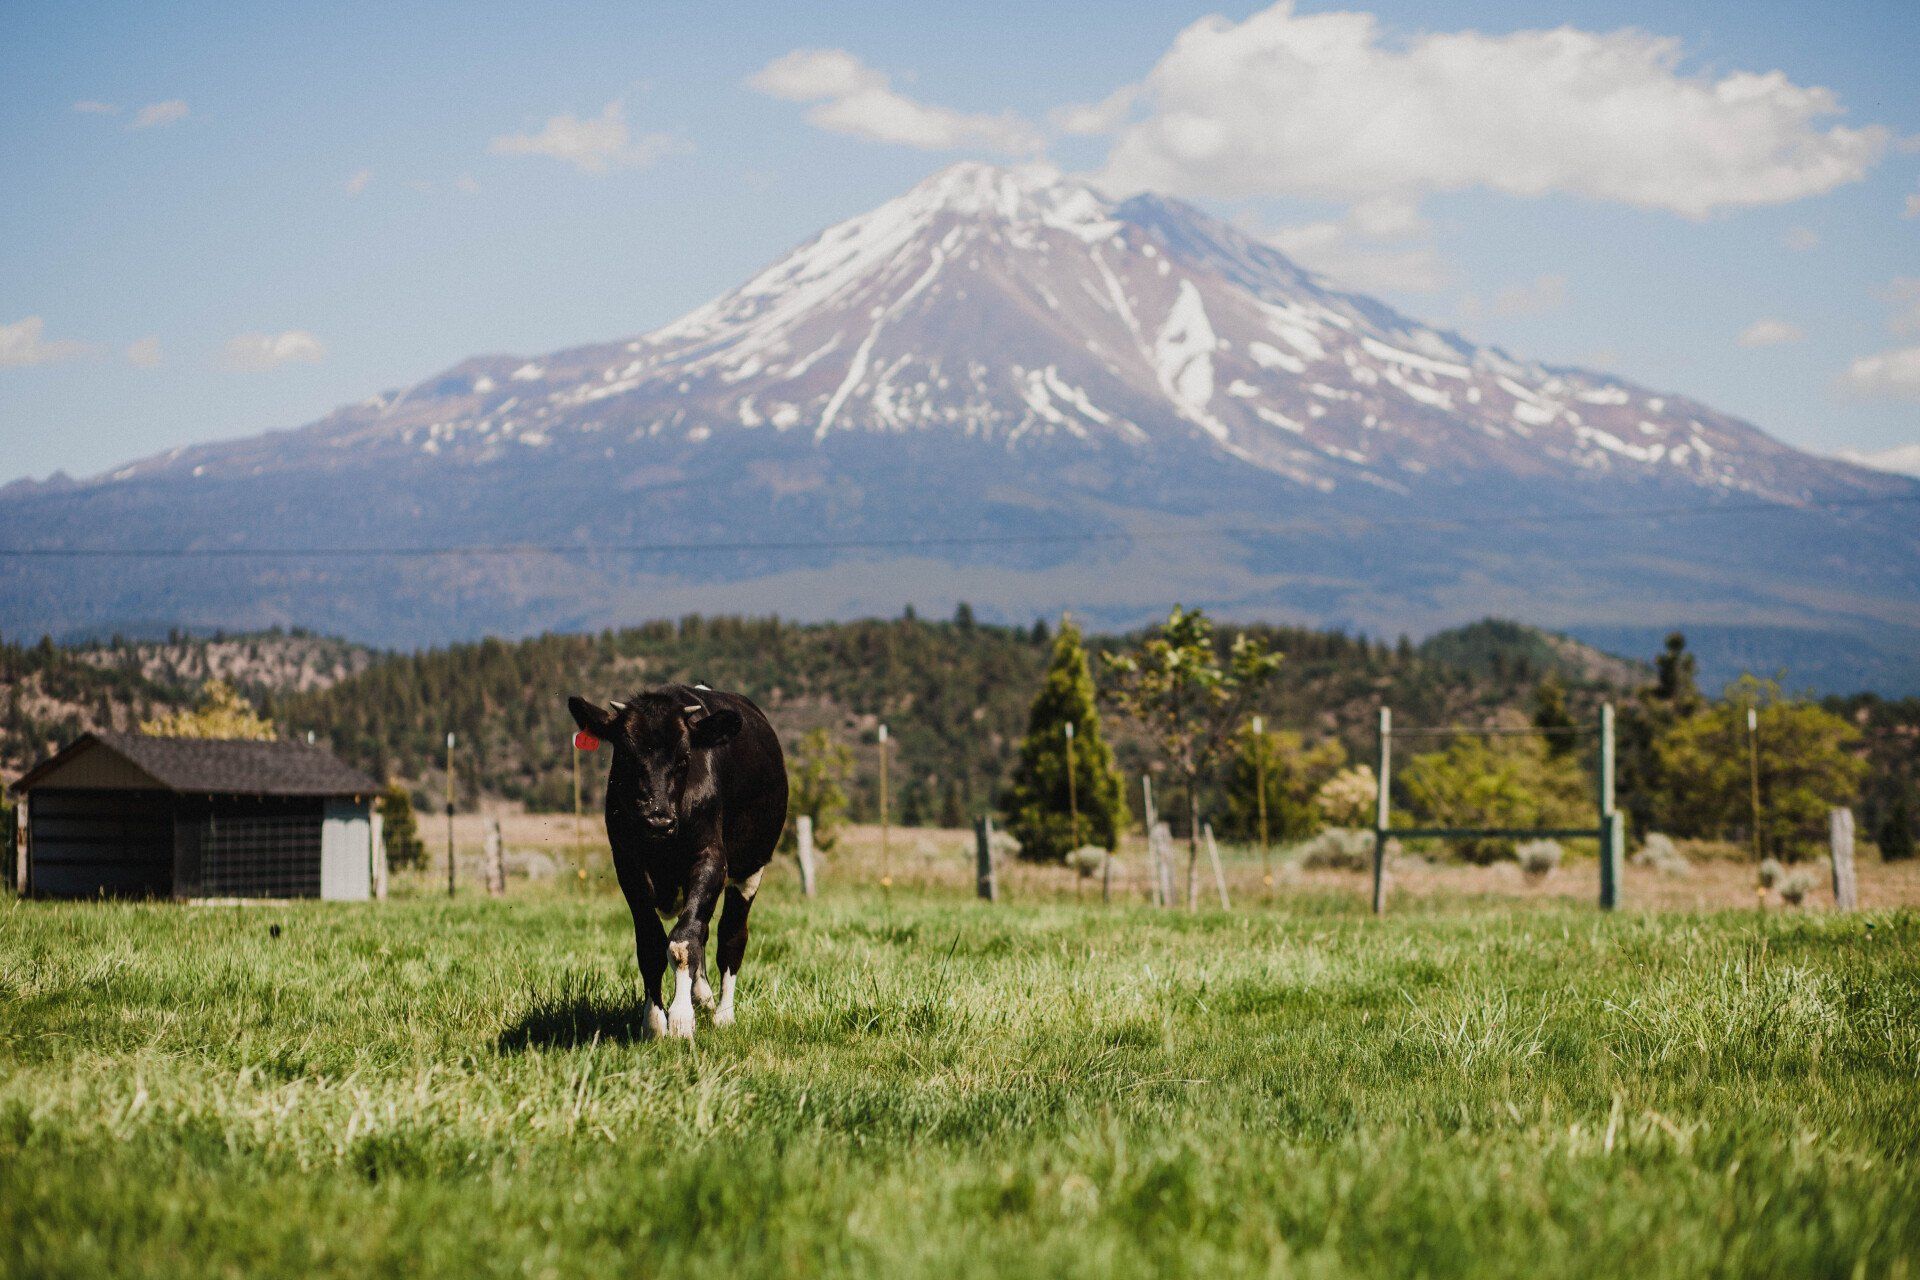 A cow is standing in a grassy field with a mountain in the background.